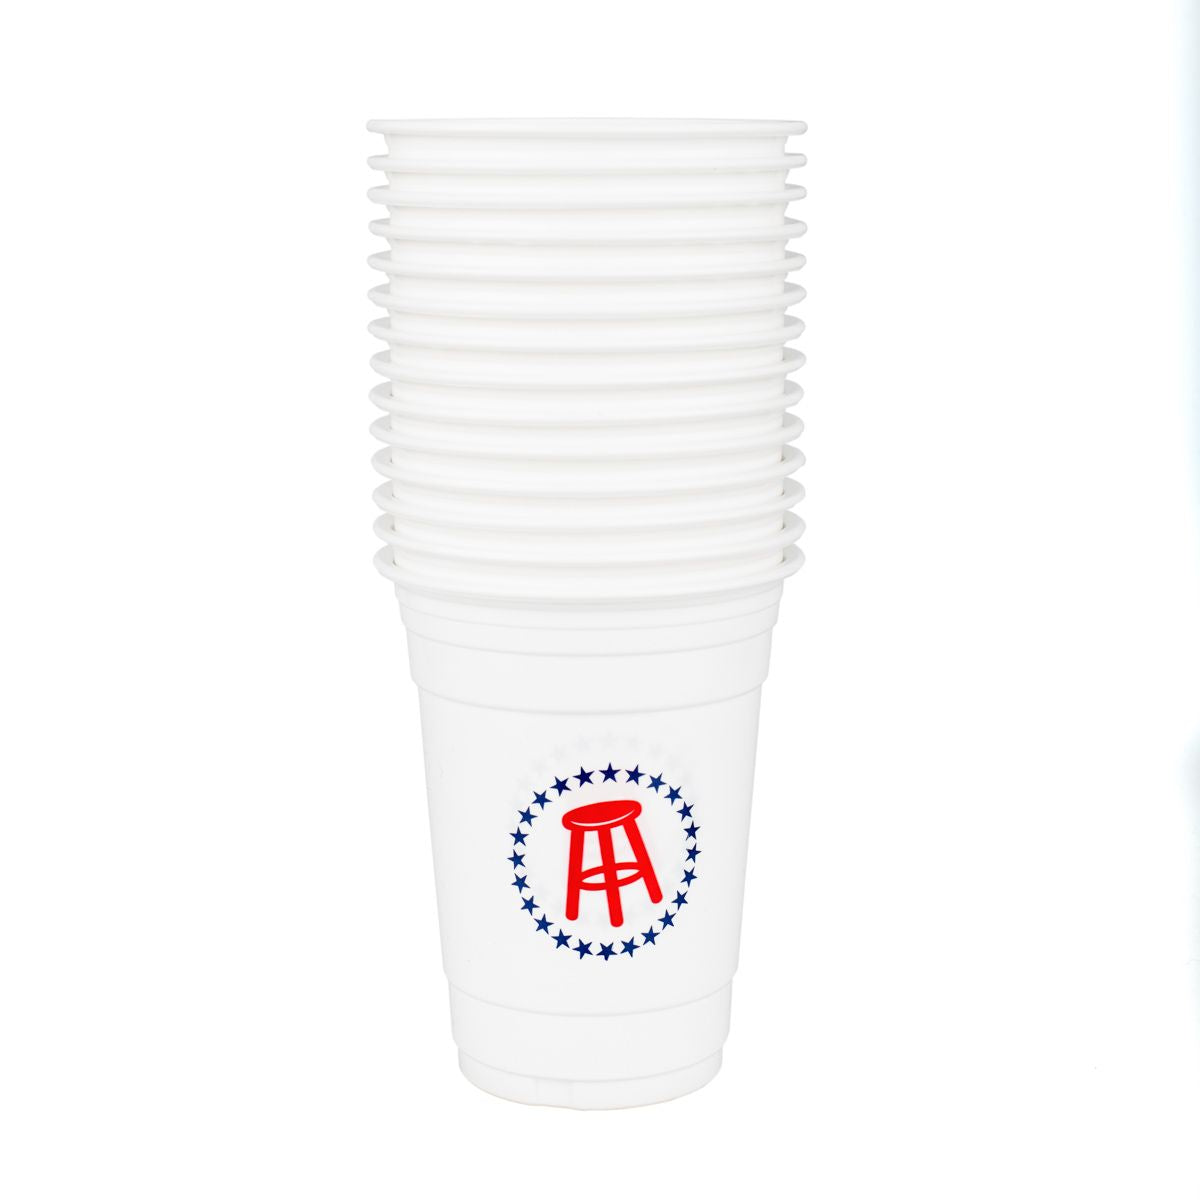 Barstool Sports Logo Party Cups - 14 Pack-Drinkware-Barstool Sports-Barstool Sports